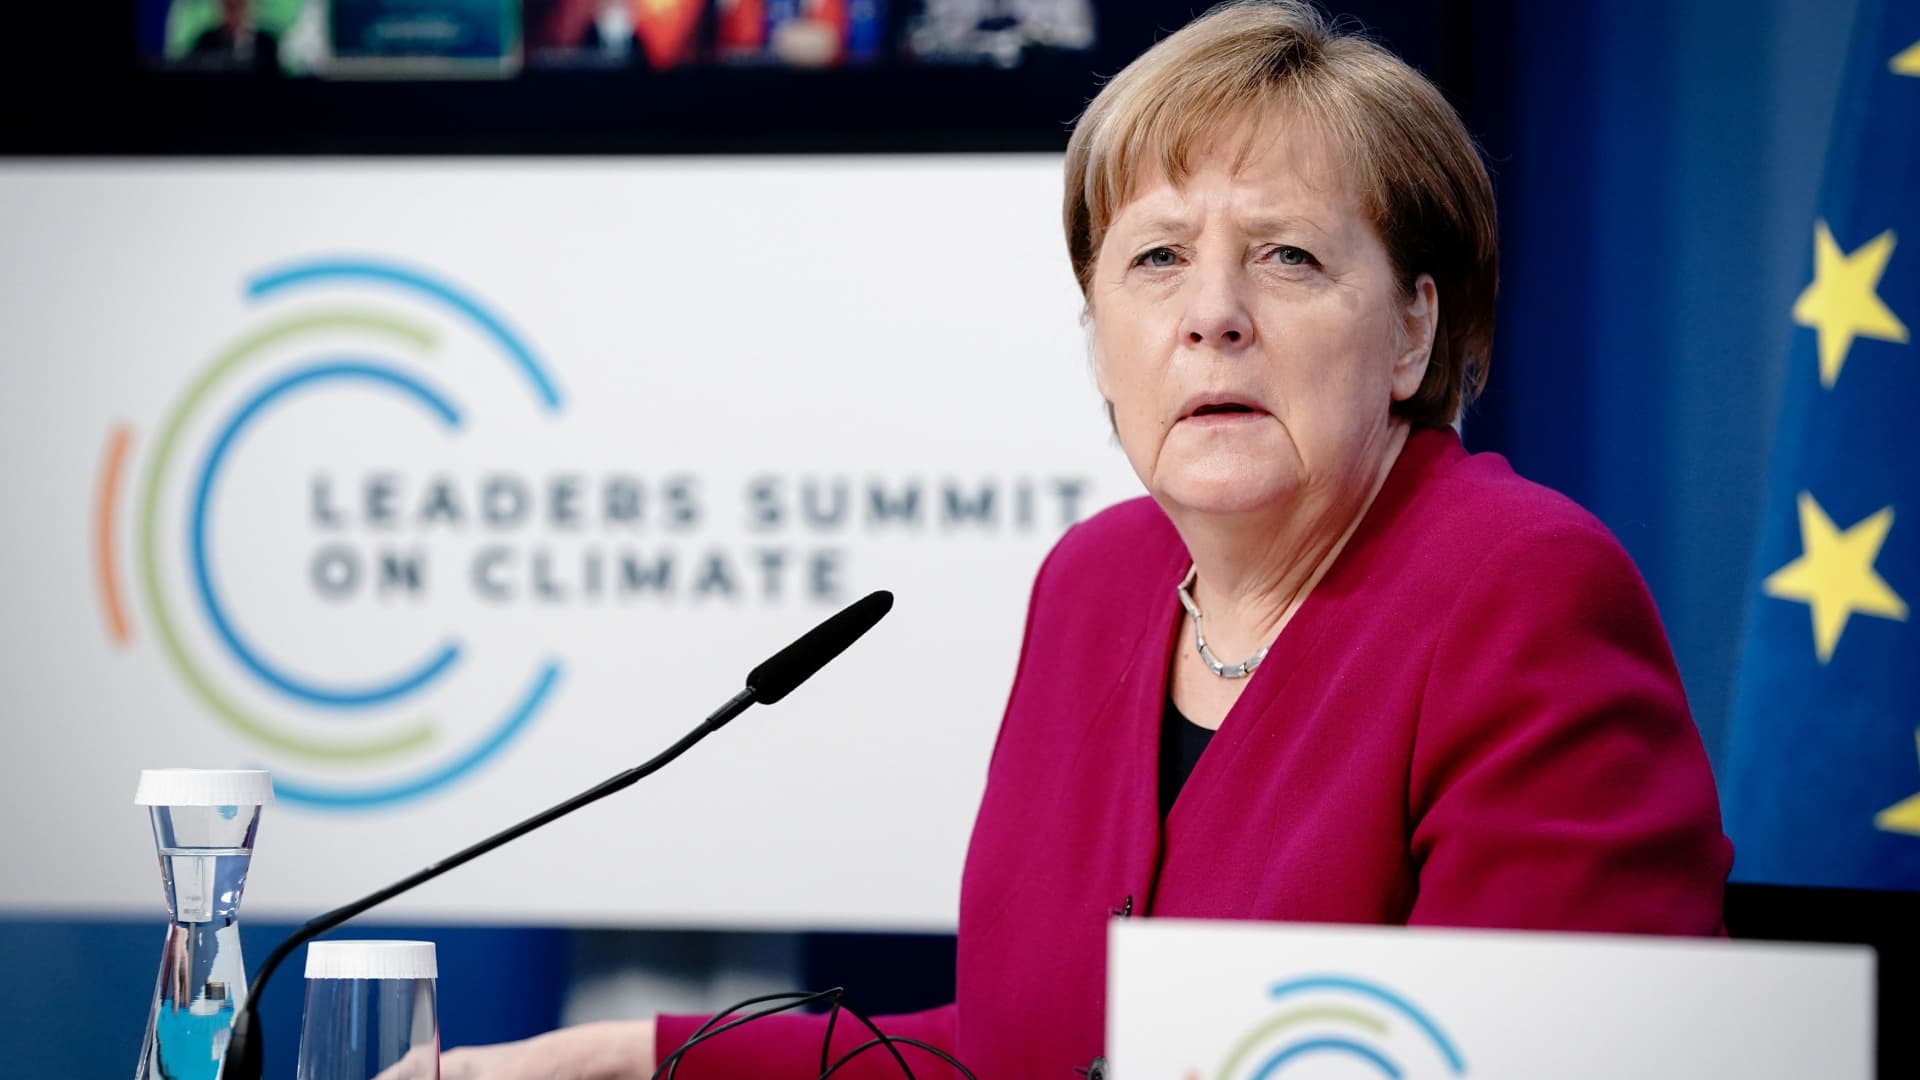 German Chancellor Angela Merkel attends a virtual Climate Summit with world leaders in Berlin, Germany, April 22, 2021.